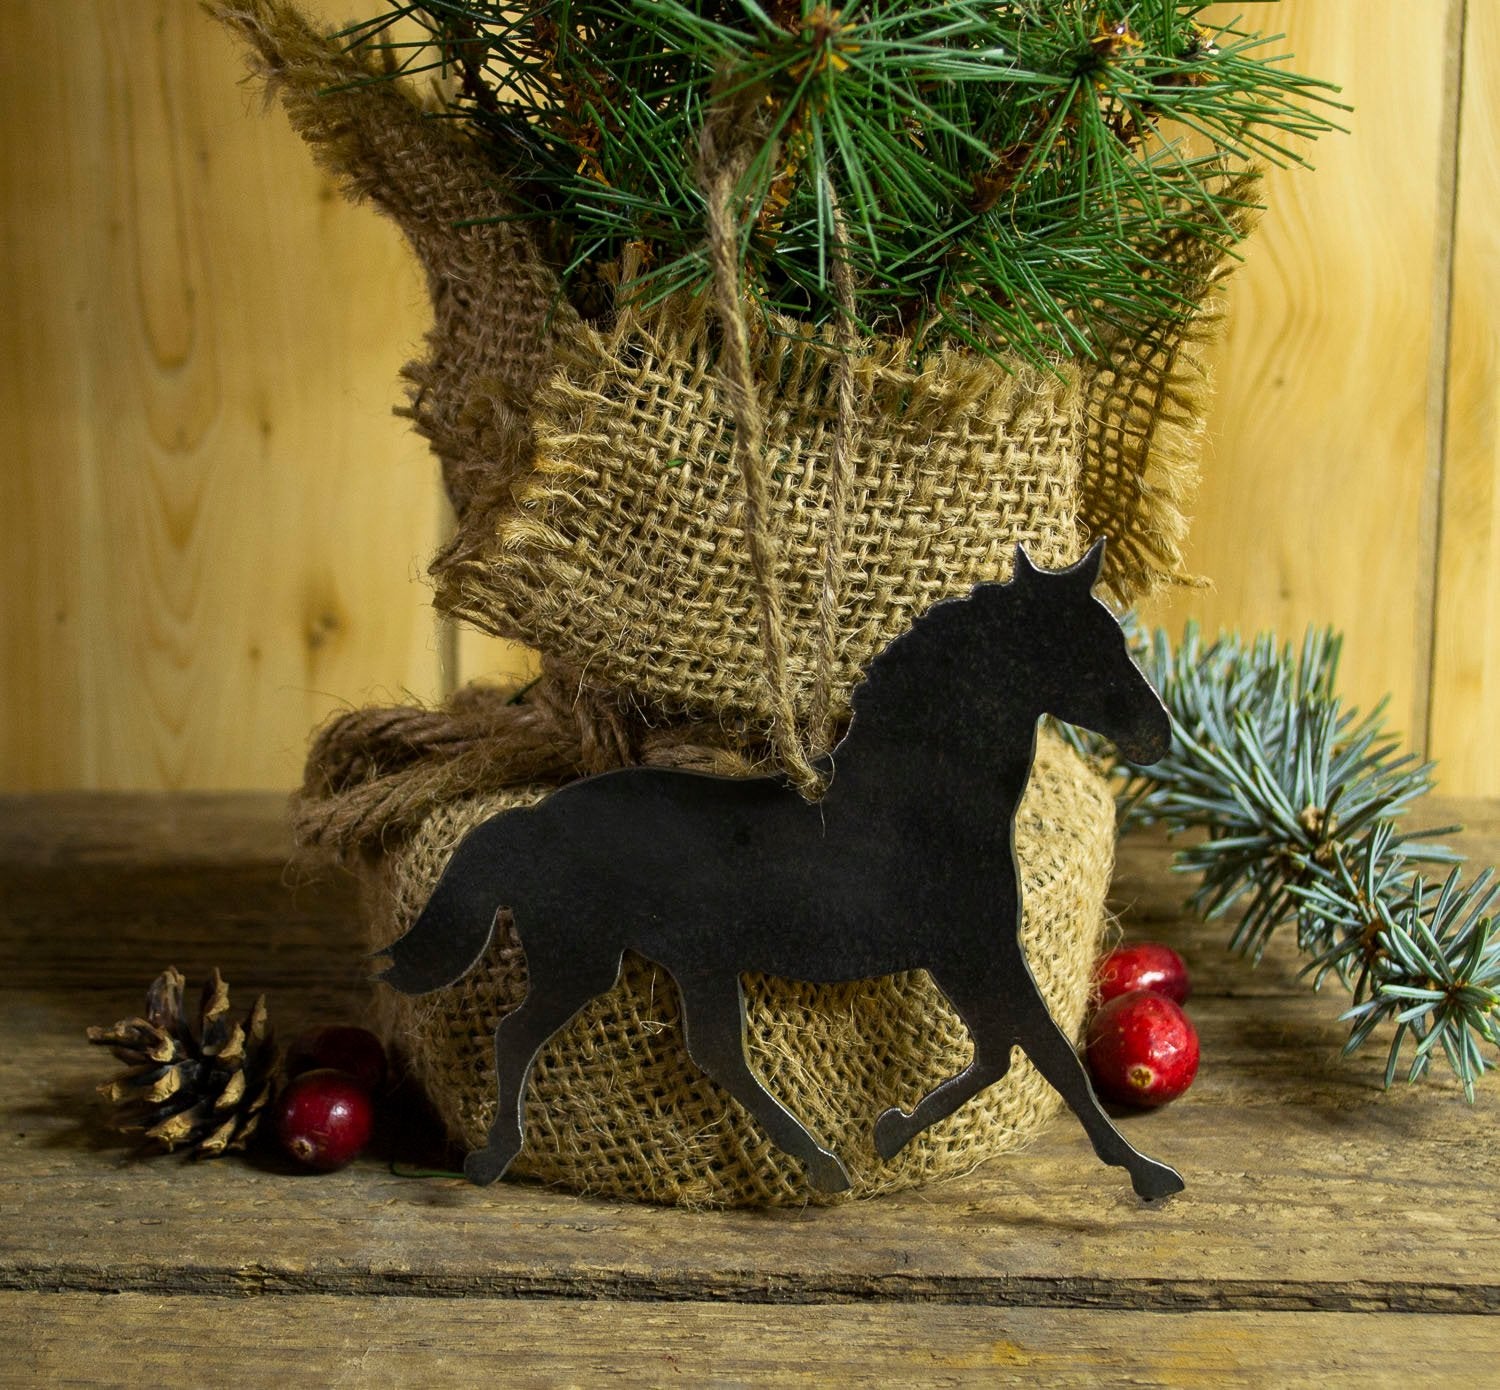 Horse Equestrian Metal Christmas Ornament Tree Stocking Stuffer Party Favor Holiday Decoration Raw Steel Gift Recycled Nature Home Decor